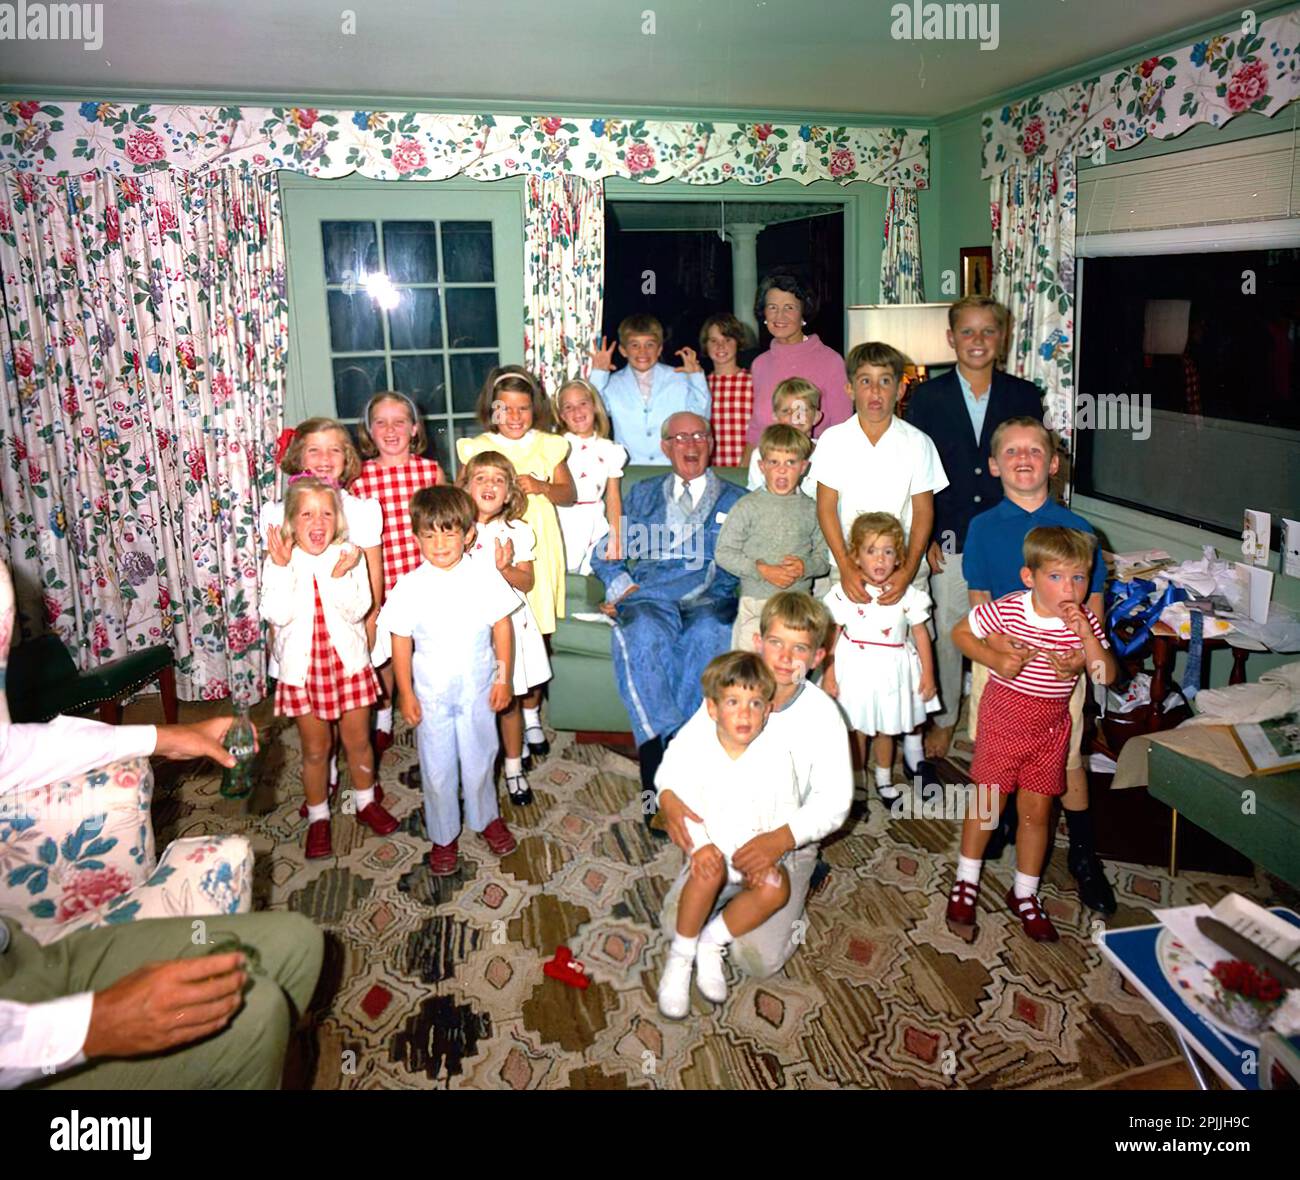 ST-C289-7-63           7 September 1963 Joseph P. Kennedy, Sr. celebrating his 75th birthday with grandchildren in Hyannisport.  Photo includes: (front row) John F. Kennedy, Jr., Robert F. Kennedy, Jr., (second row left) Kerry Kennedy, Timothy Shriver, (second row, right) Robin Lawford, William Kennedy Shriver, (third row, left) Caroline Kennedy, Victoria Lawford, (third row, right) Michael Kennedy, Robert Shriver, Steven Smith, Jr., (left fourth row) Courtney Kennedy, Maria Shriver, Joseph P. Kennedy, Sr., David Kennedy, Joseph P. Kennedy III, (left, fifth row) Sidney Lawford, Christopher Law Stock Photo